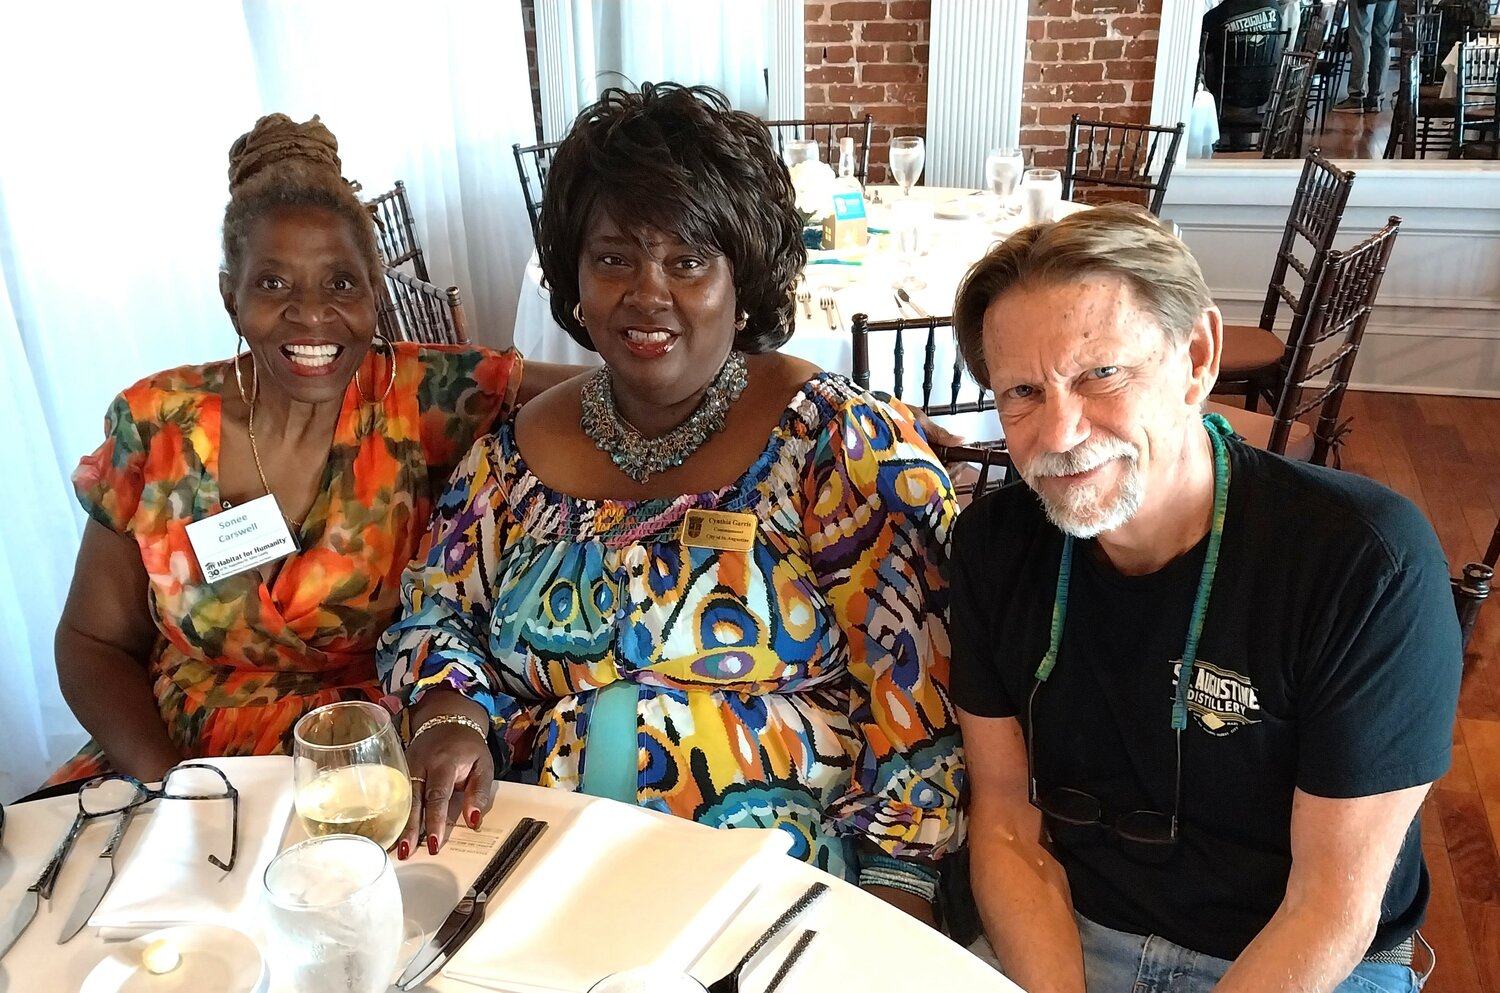 Pictured from left, Sonee Carswell, Cynthia Garris and Philip McDaniel.